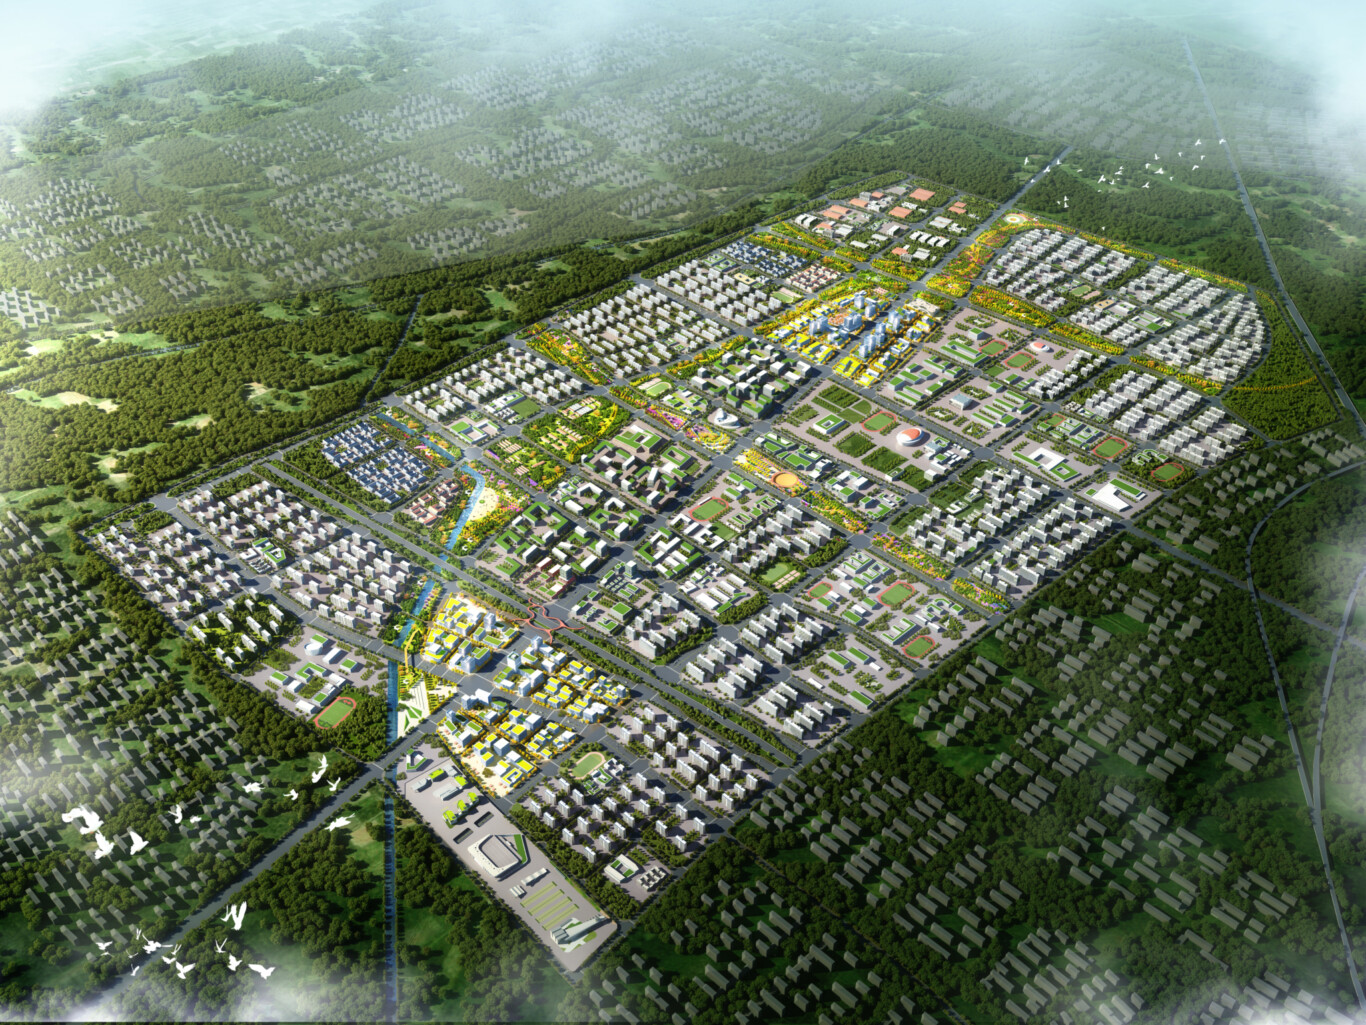 Daxing New Town By Chapman Taylor 202003001 日景鸟瞰 Yh Lyc